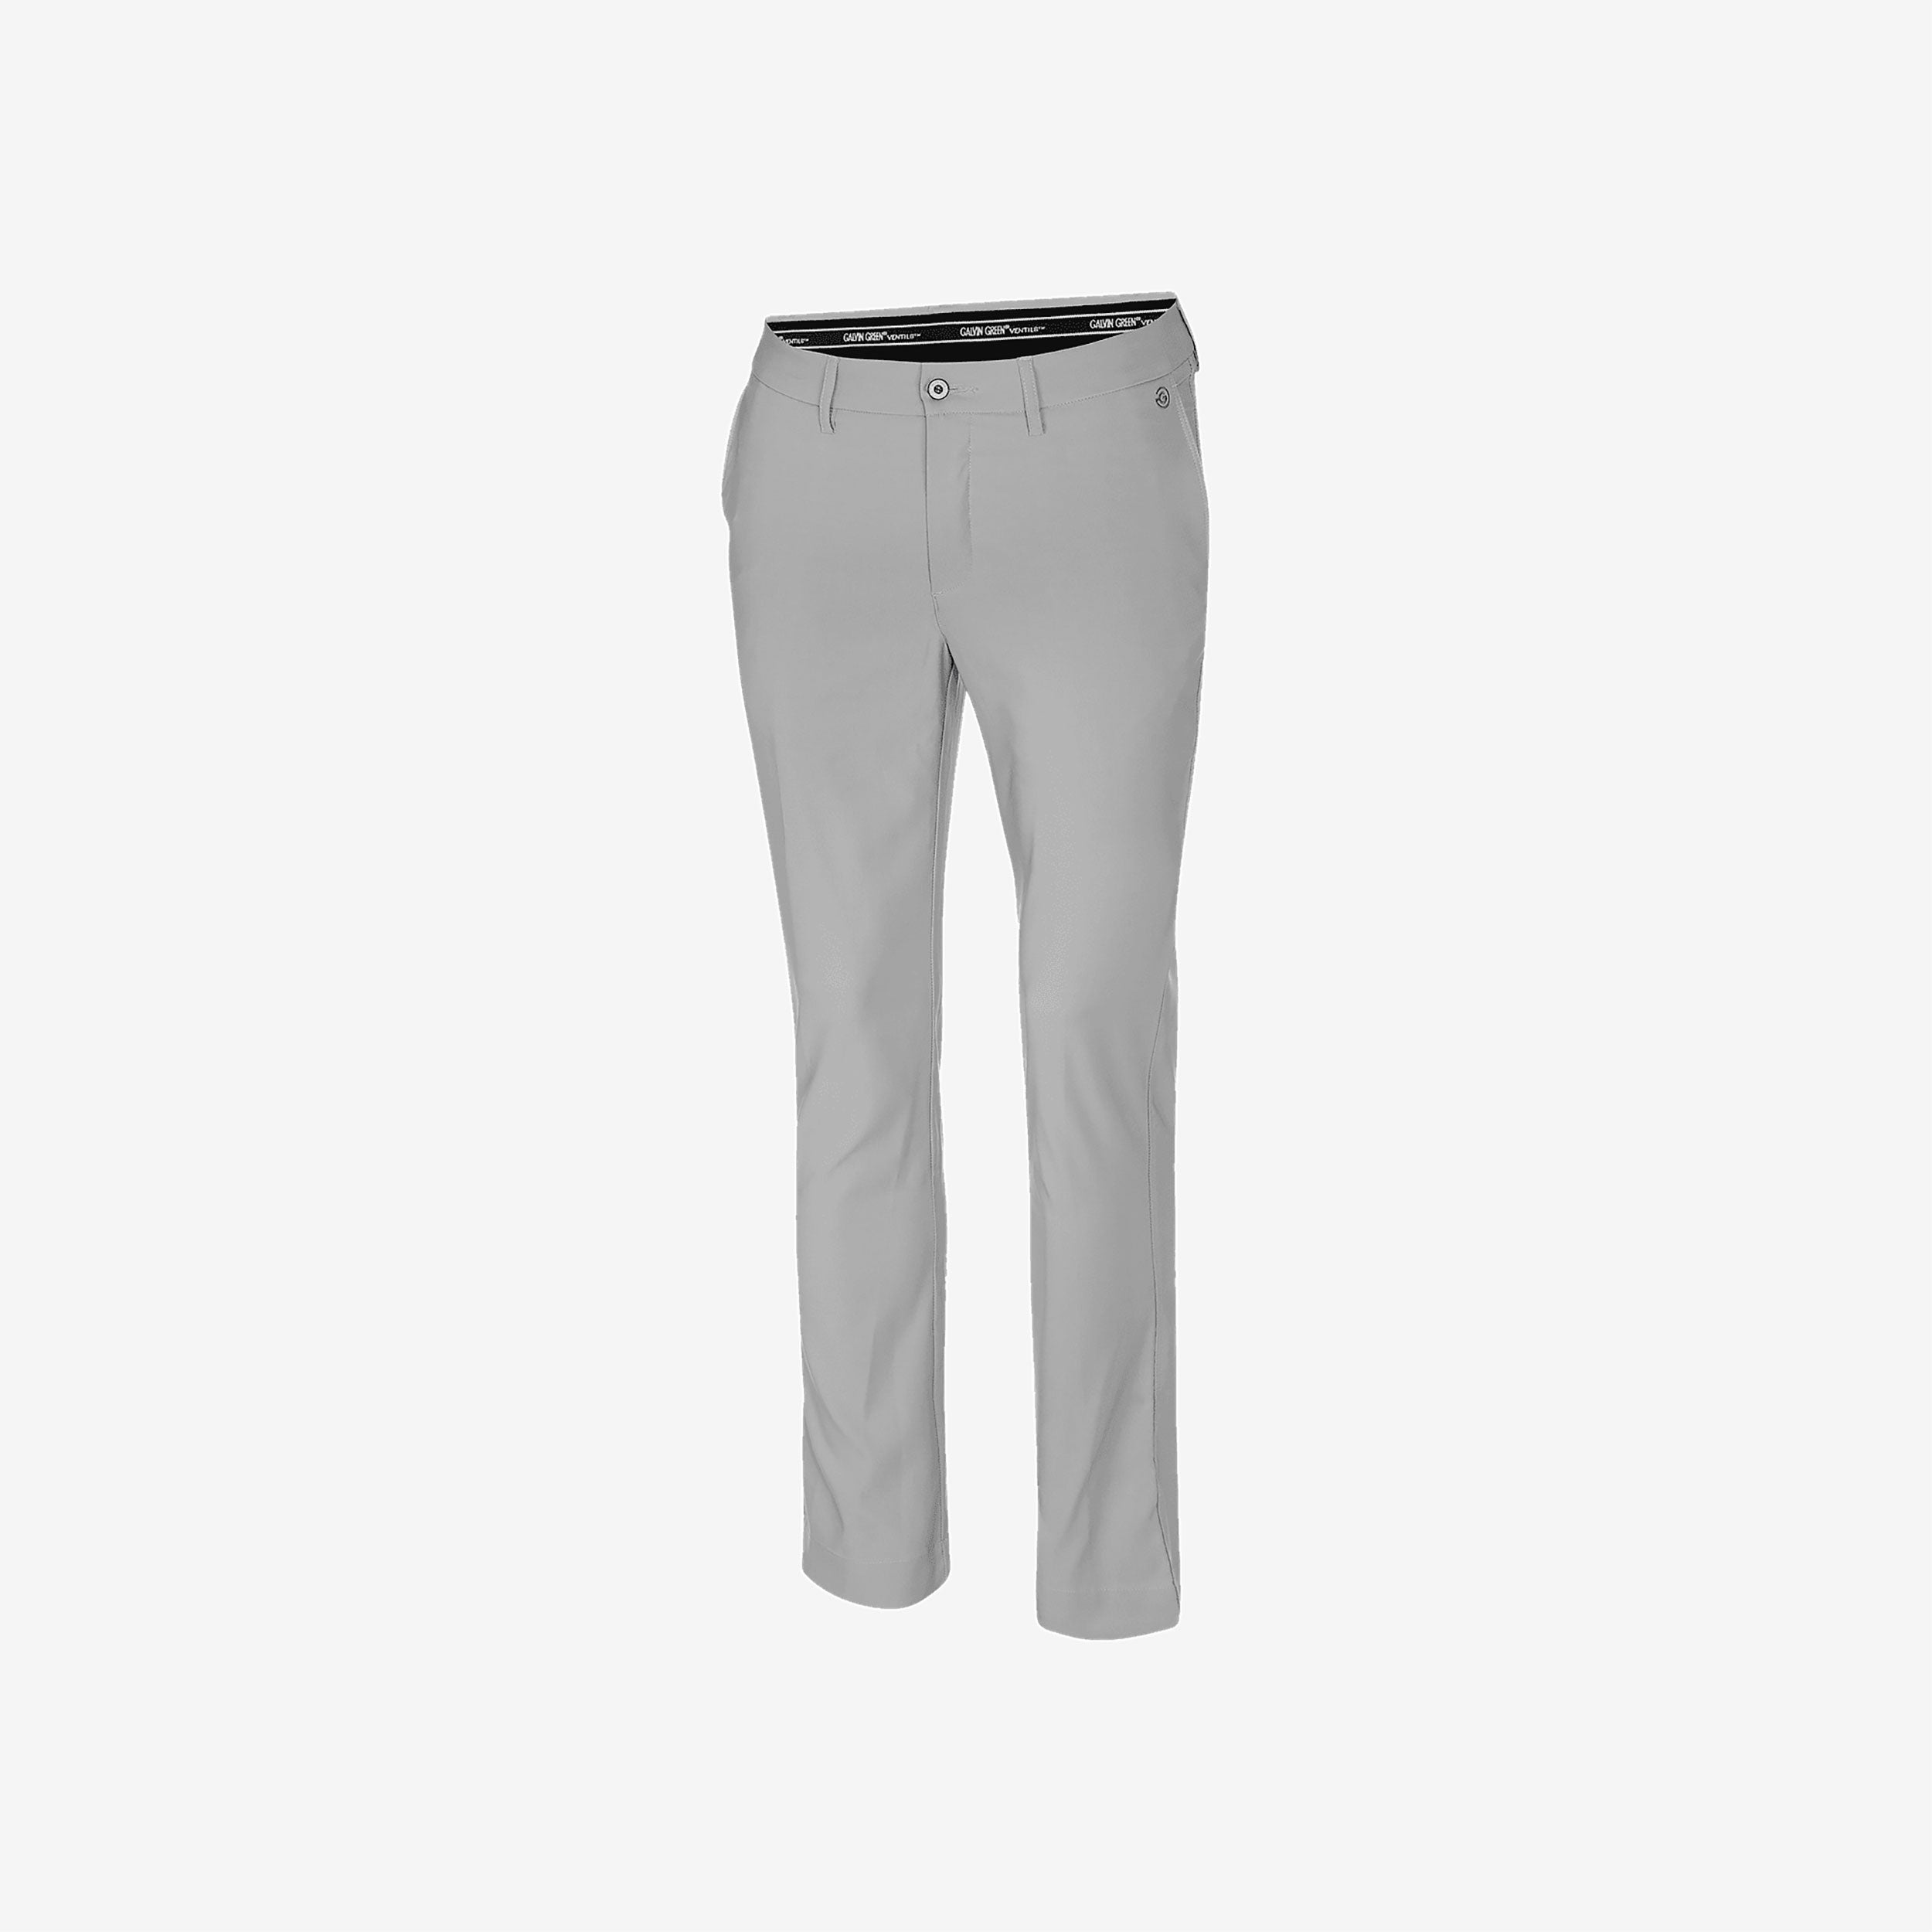 Nike Golf have an AMAZING SELECTION of golf trousers! | GolfMagic